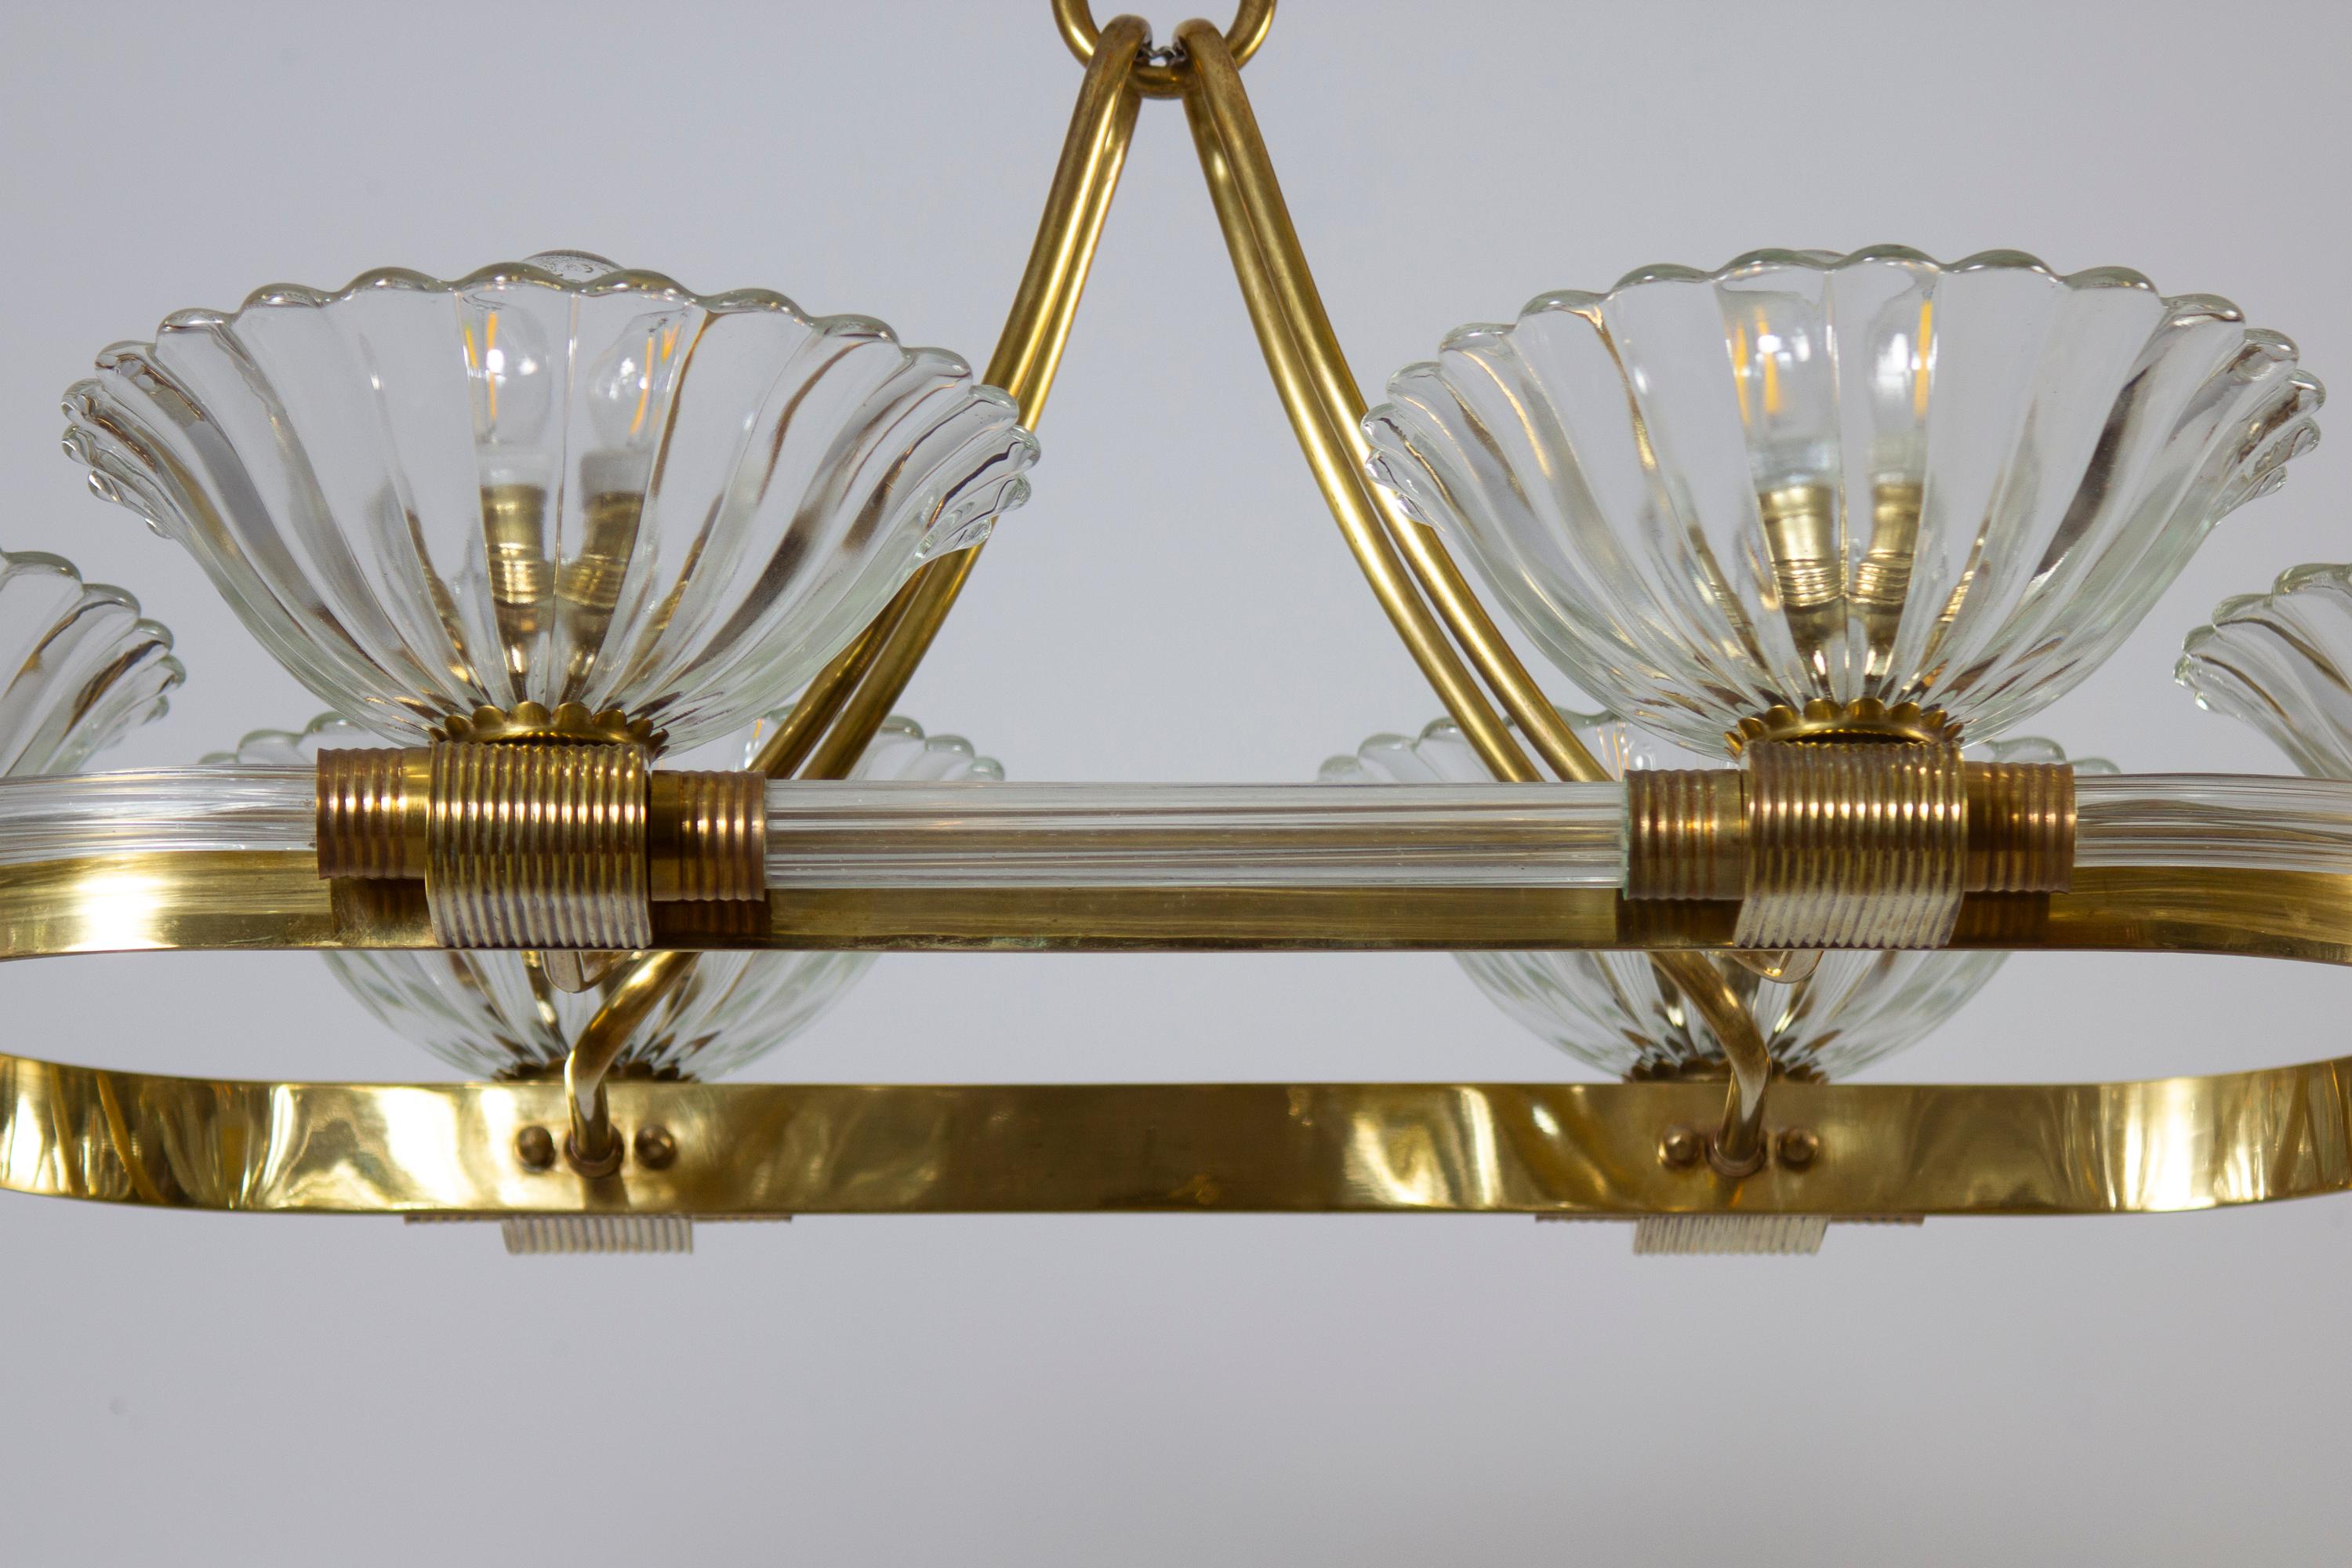  Art Deco Oval Shape Brass and Murano Glass Chandelier by Ercole Barovier 1940 For Sale 2